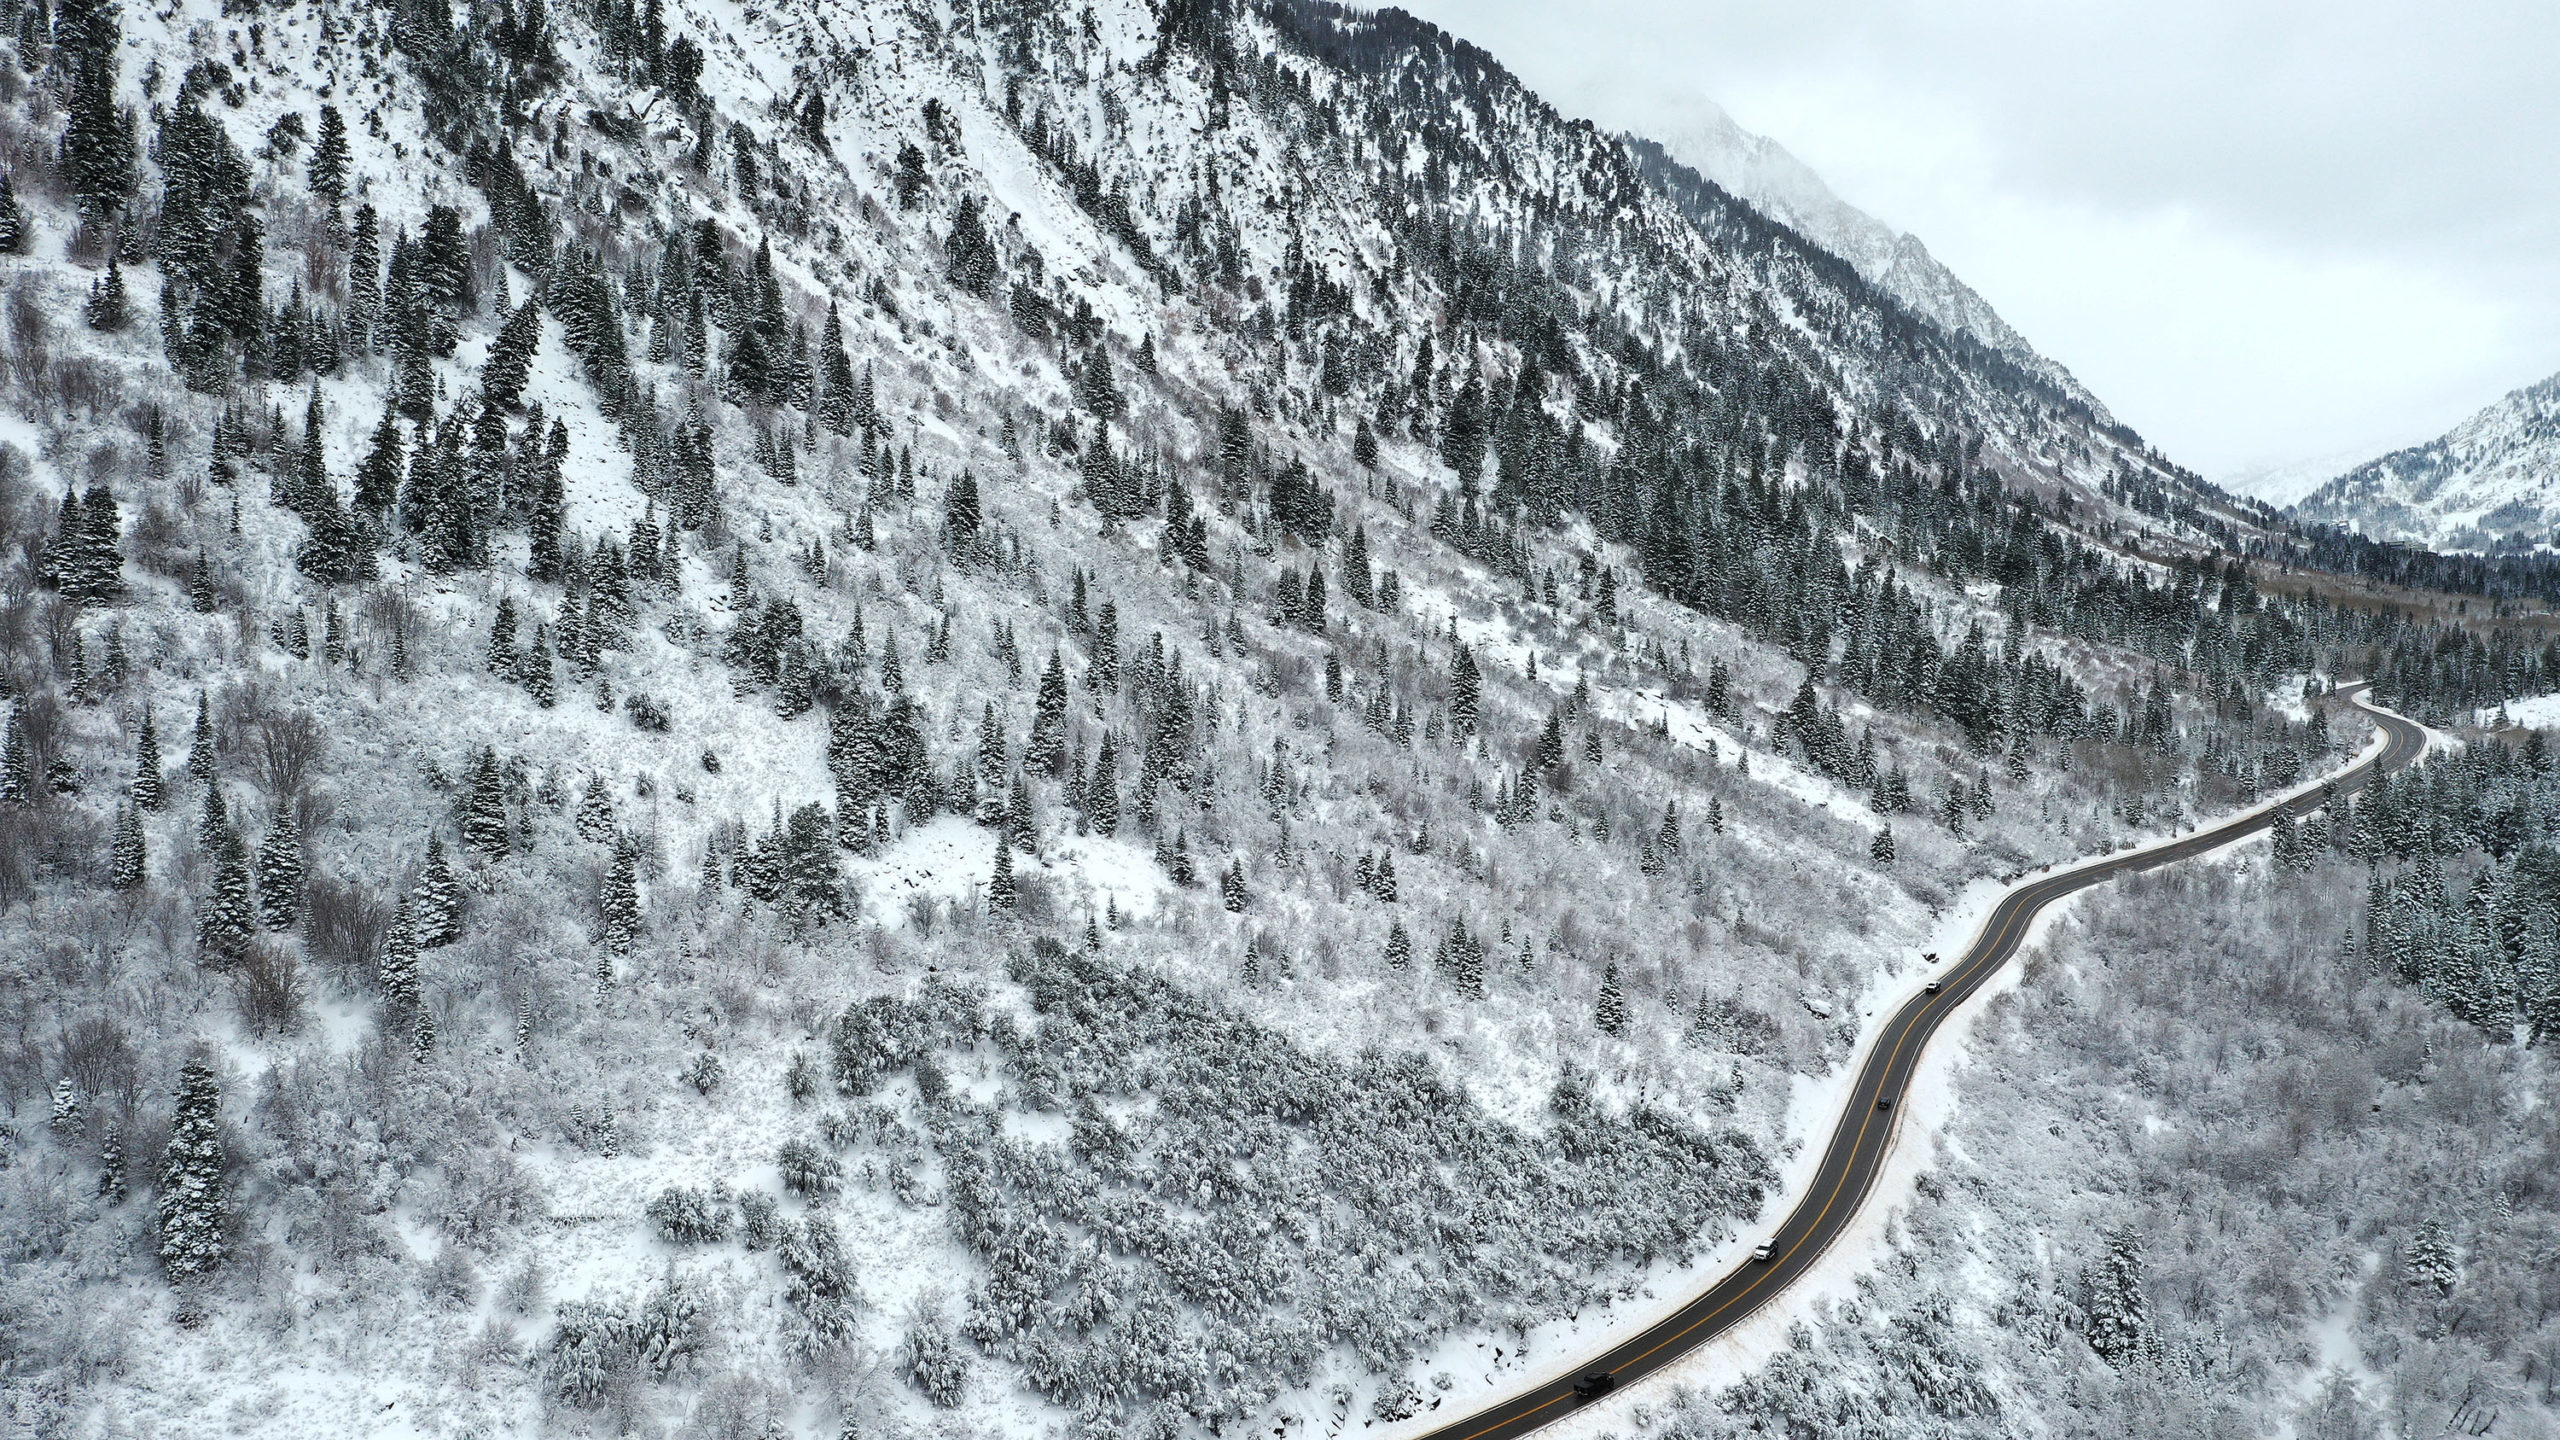 logan canyon pictured, a crash has us-89 closed...